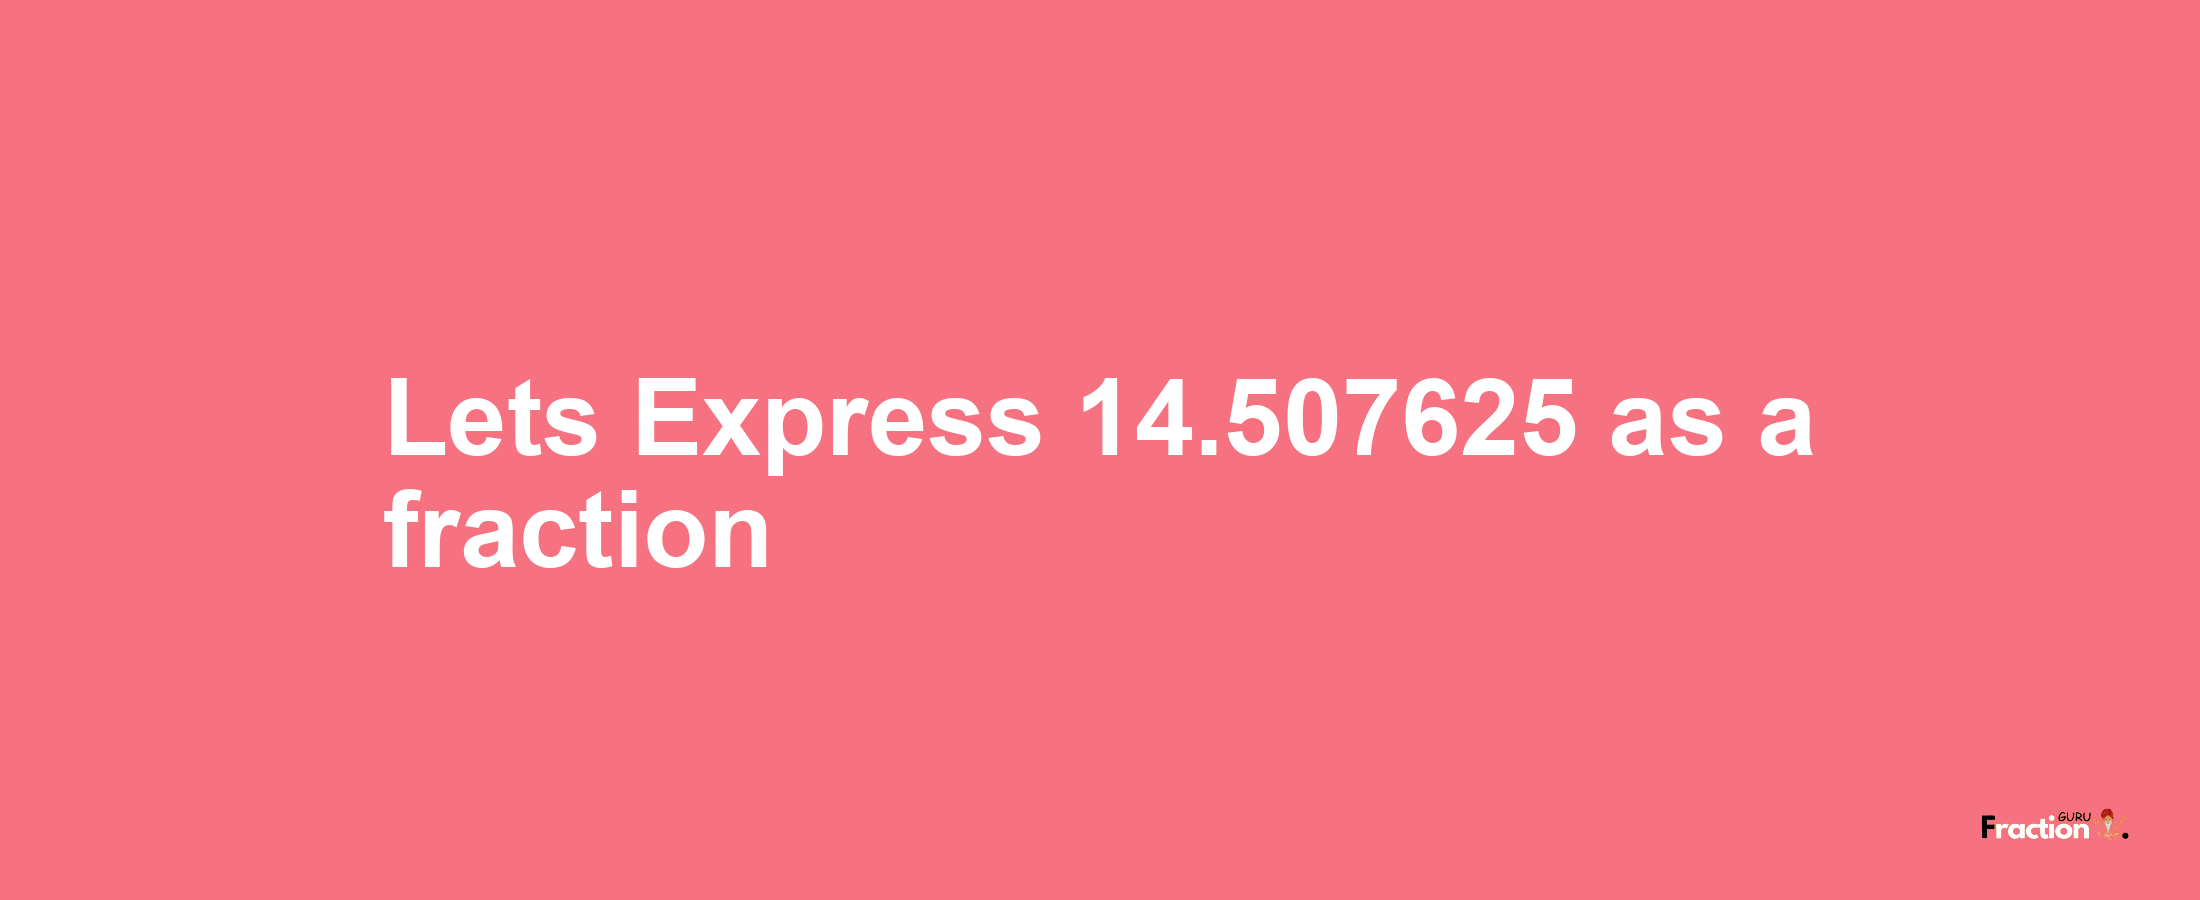 Lets Express 14.507625 as afraction